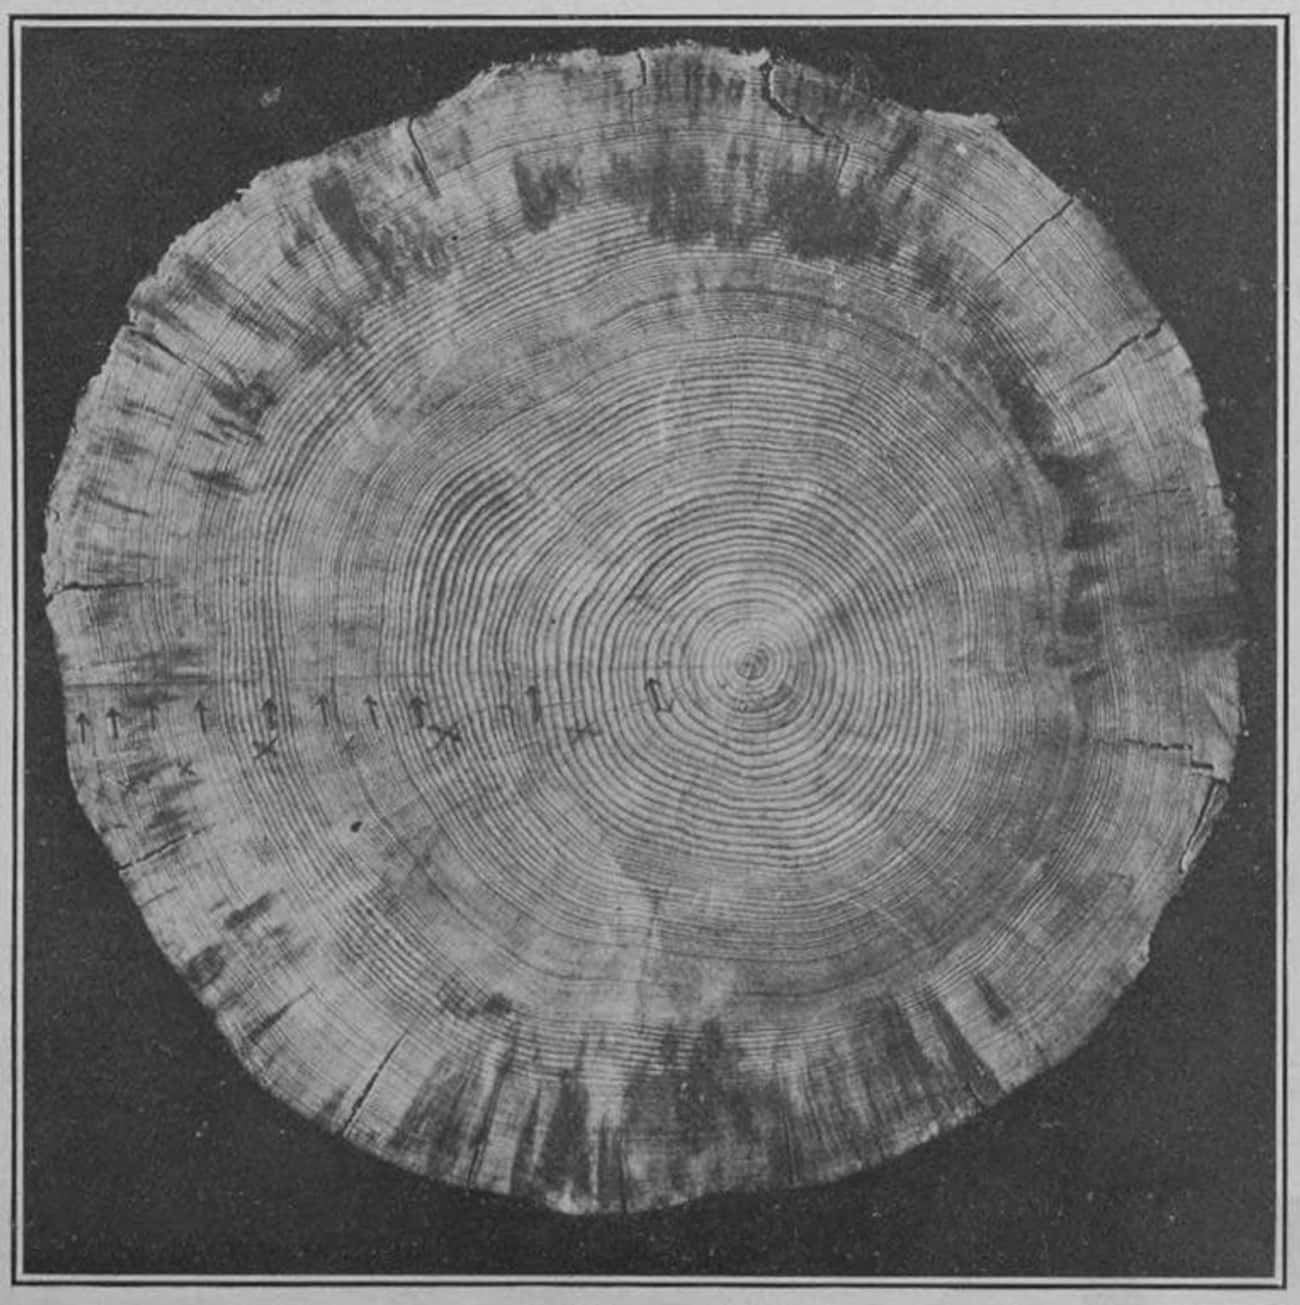 Tree Rings Reveal How Much The Climate Impacted The Environment